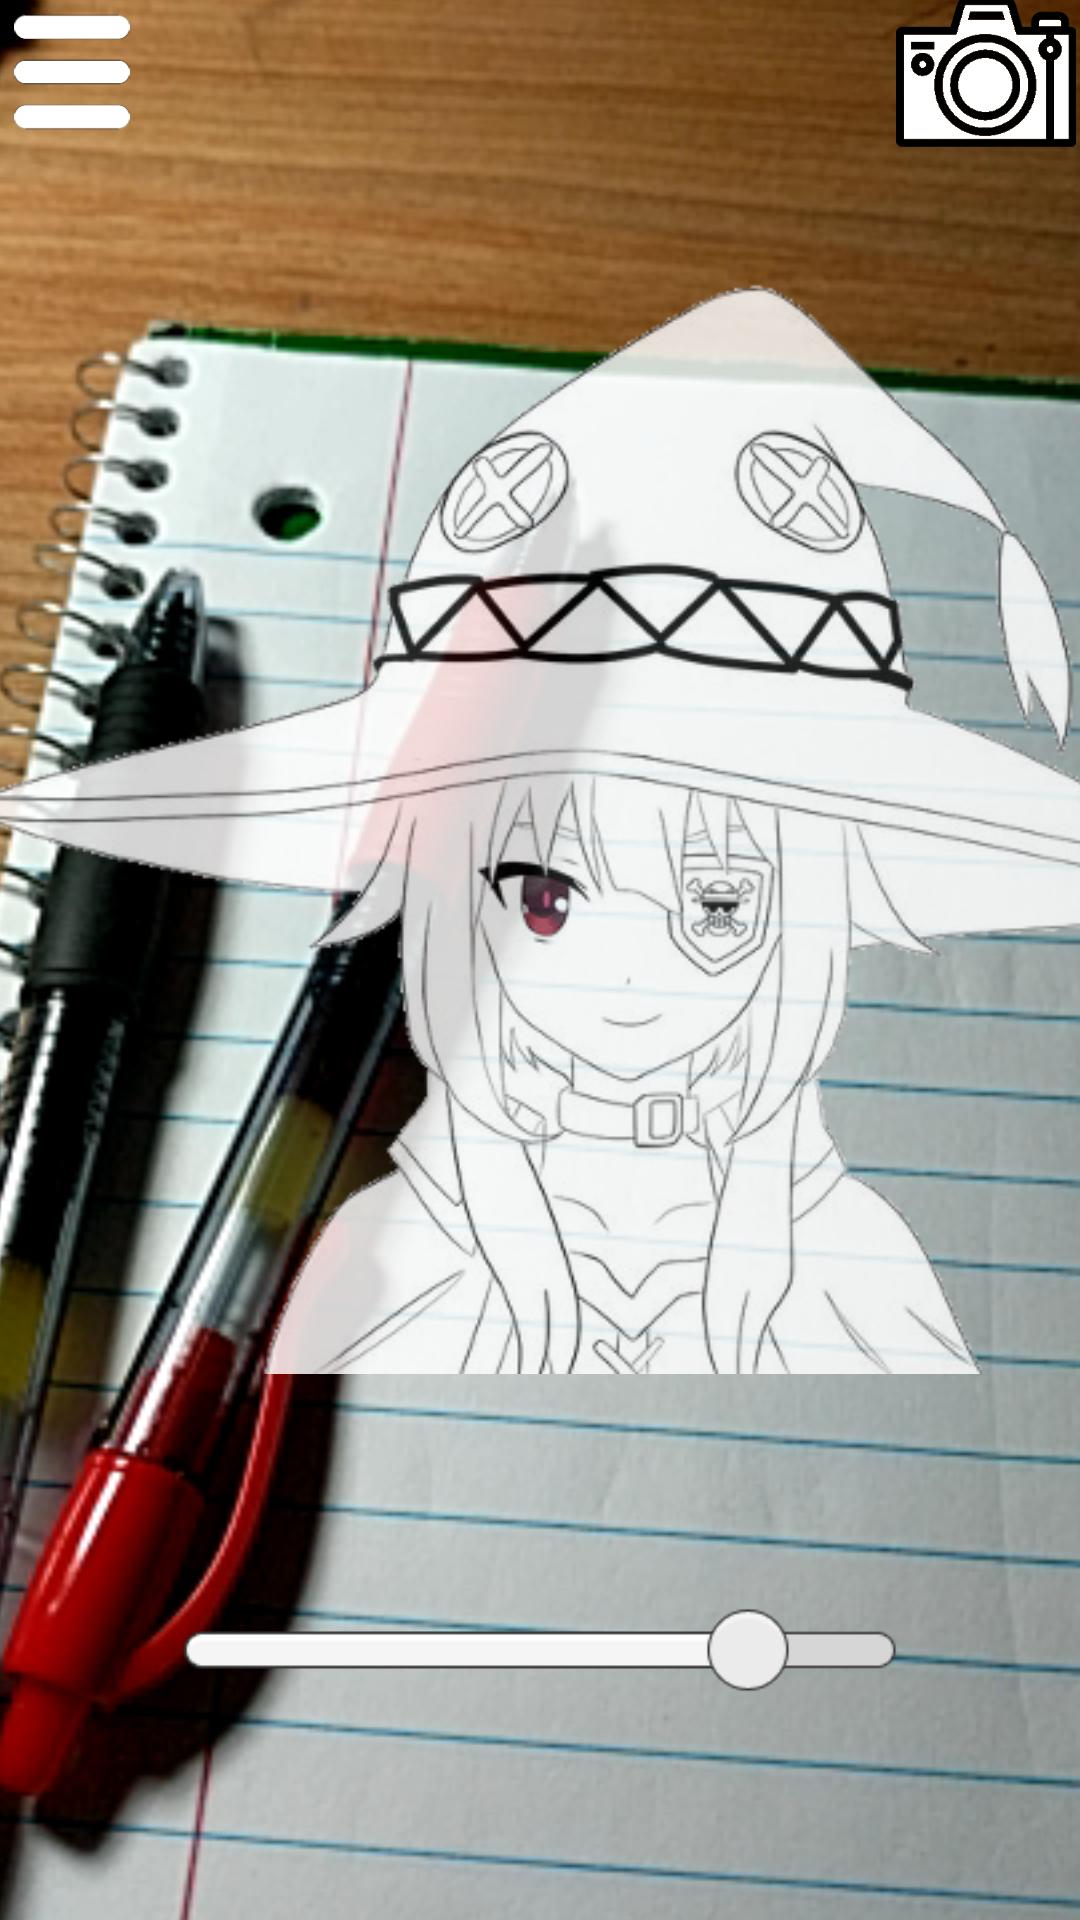 Learn To Draw Anime For Beginners - Neofotografi